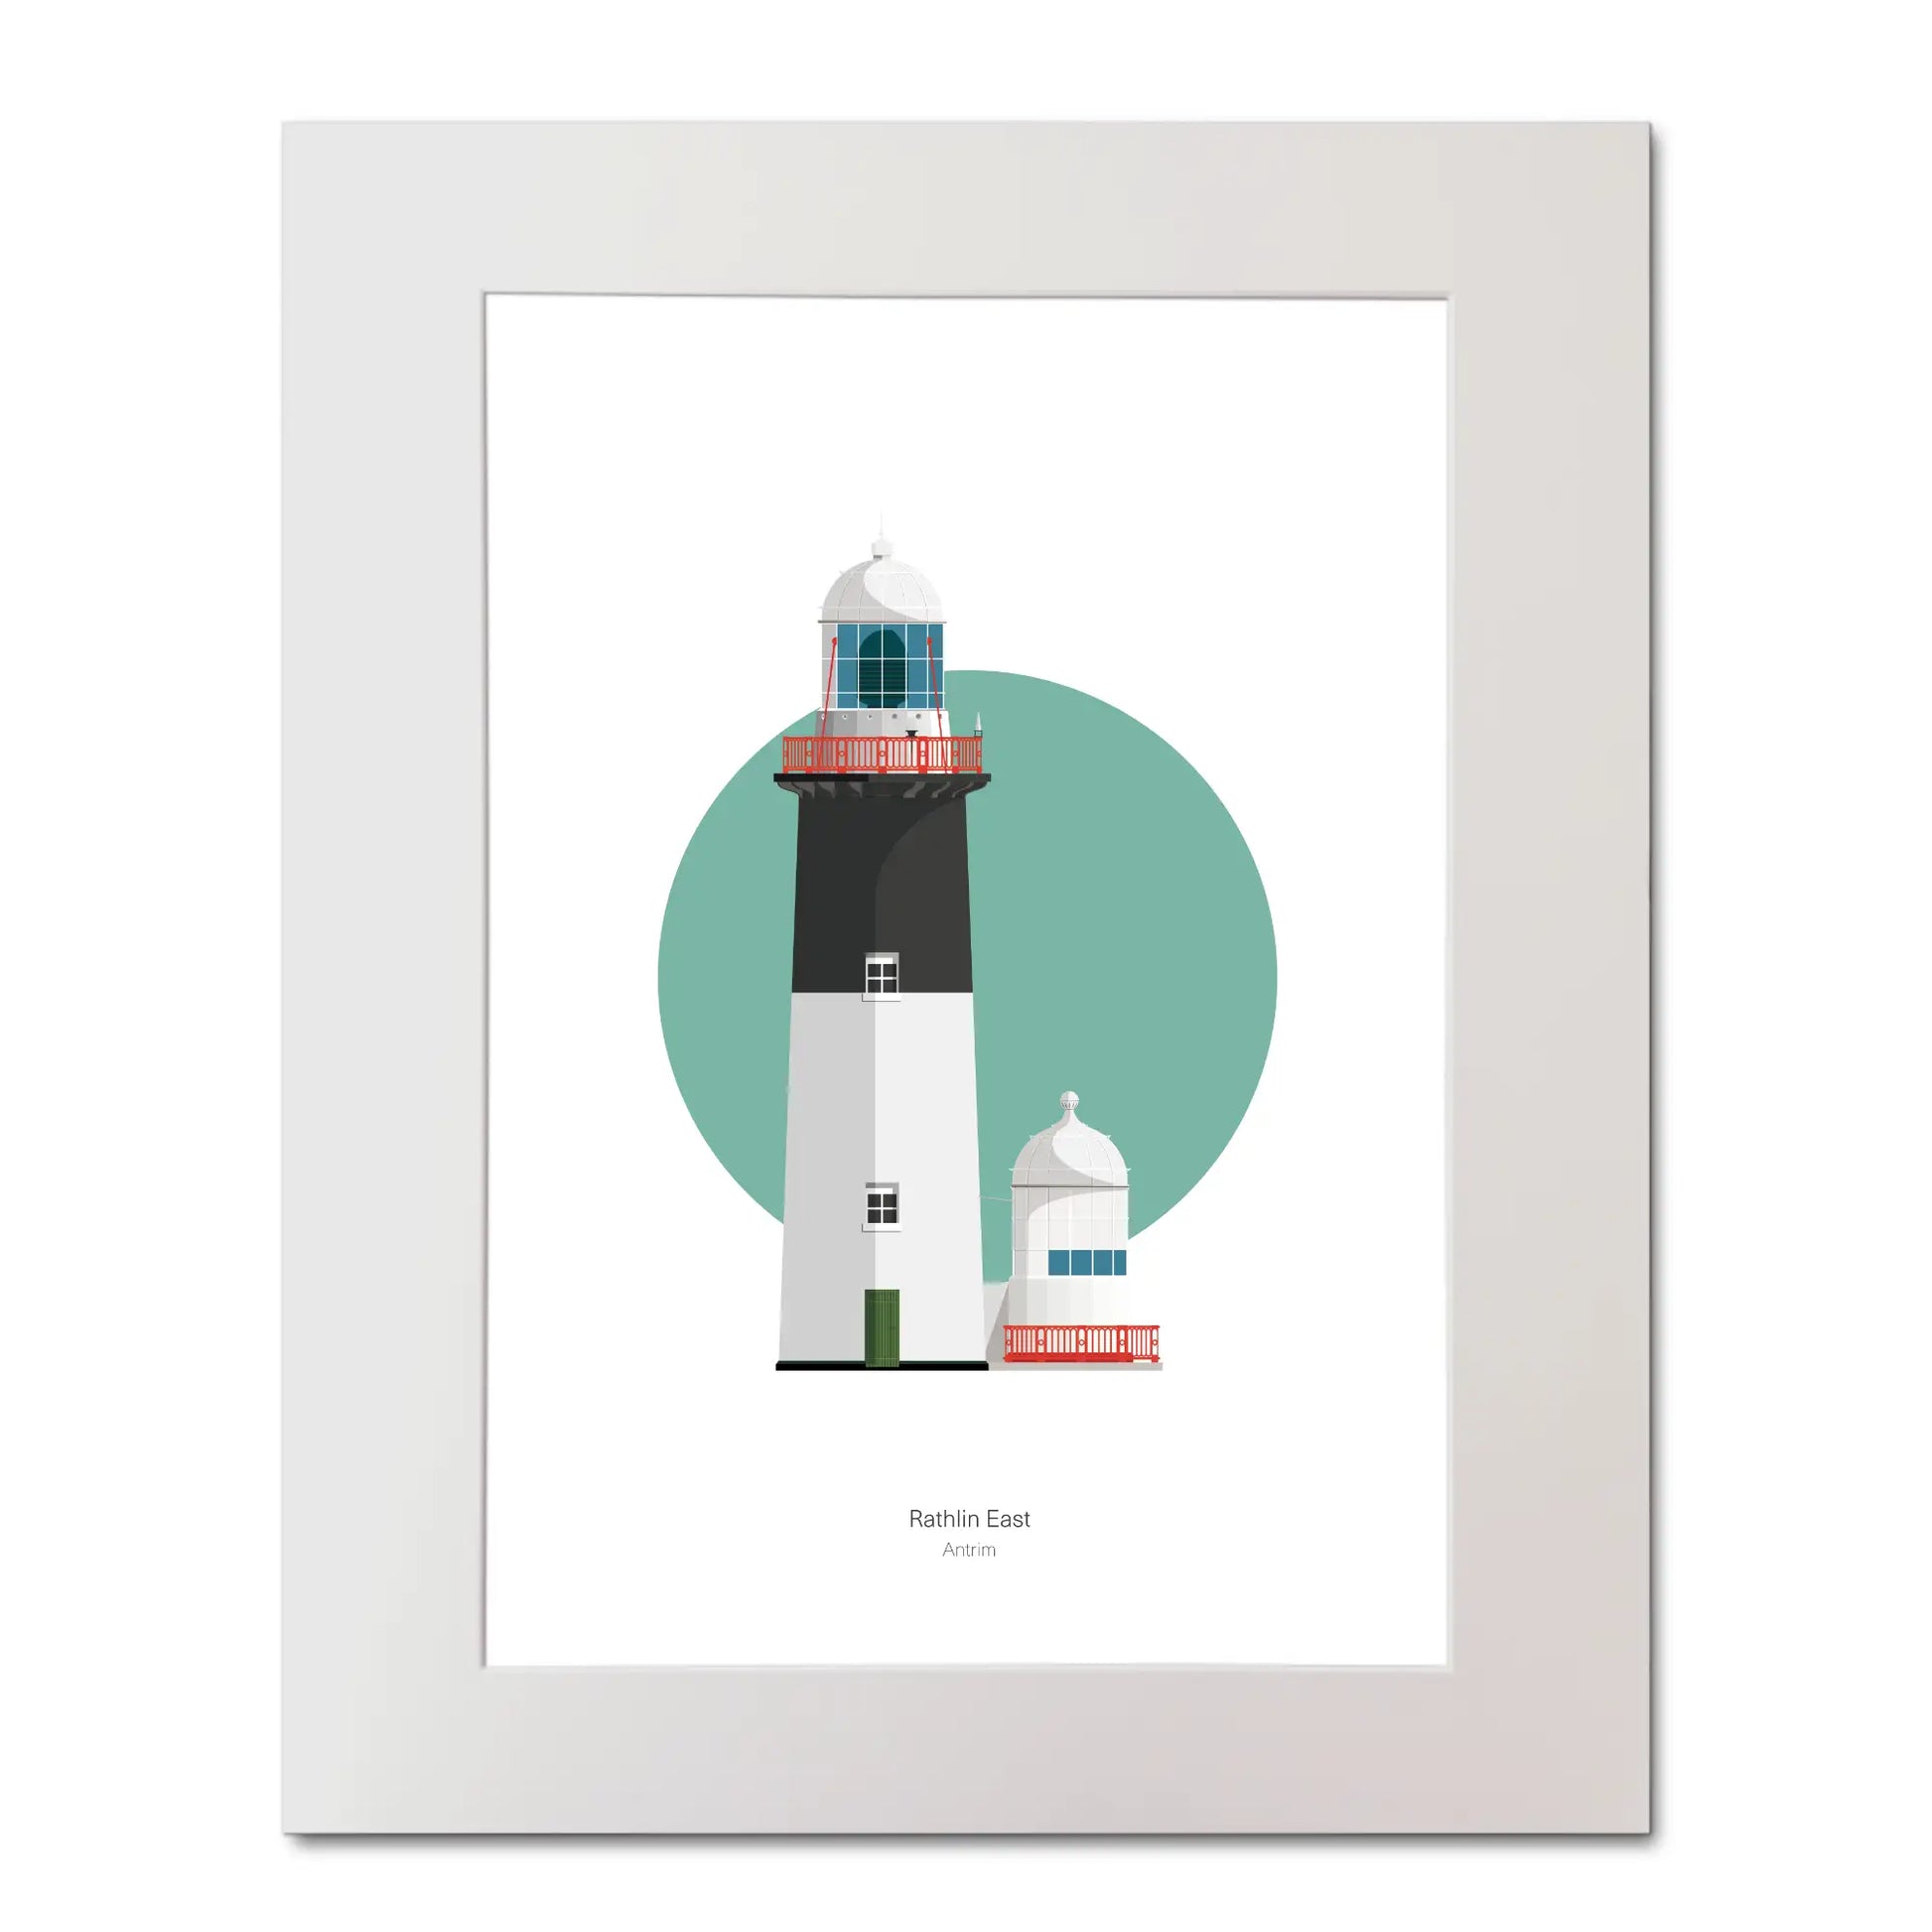 Illustration of Rathlin East lighthouse on a white background inside light blue square, mounted and measuring 40x50cm.